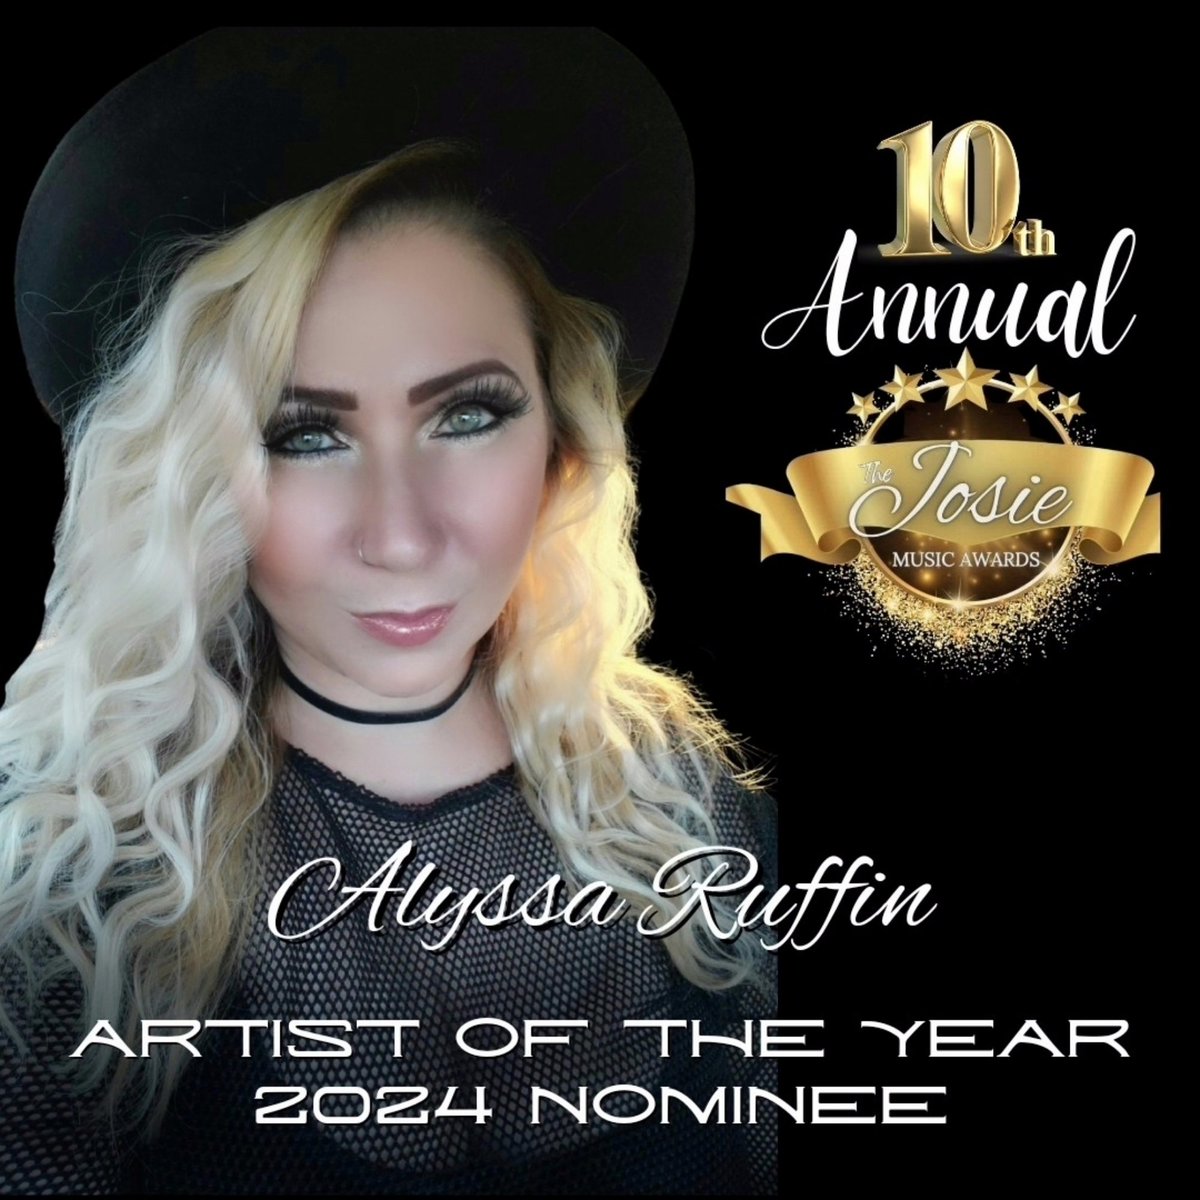 I am honored to be nominated for ARTIST OF THE YEAR at the 10th Annual @josiemusicaward held at the legendary Grand Ole @opry House in Nashville! This is a big year, so excited!

#AlyssaRuffin #Highway83Records #josiemusicawards #jmas #artistoftheyear #nominee #grandoleopry